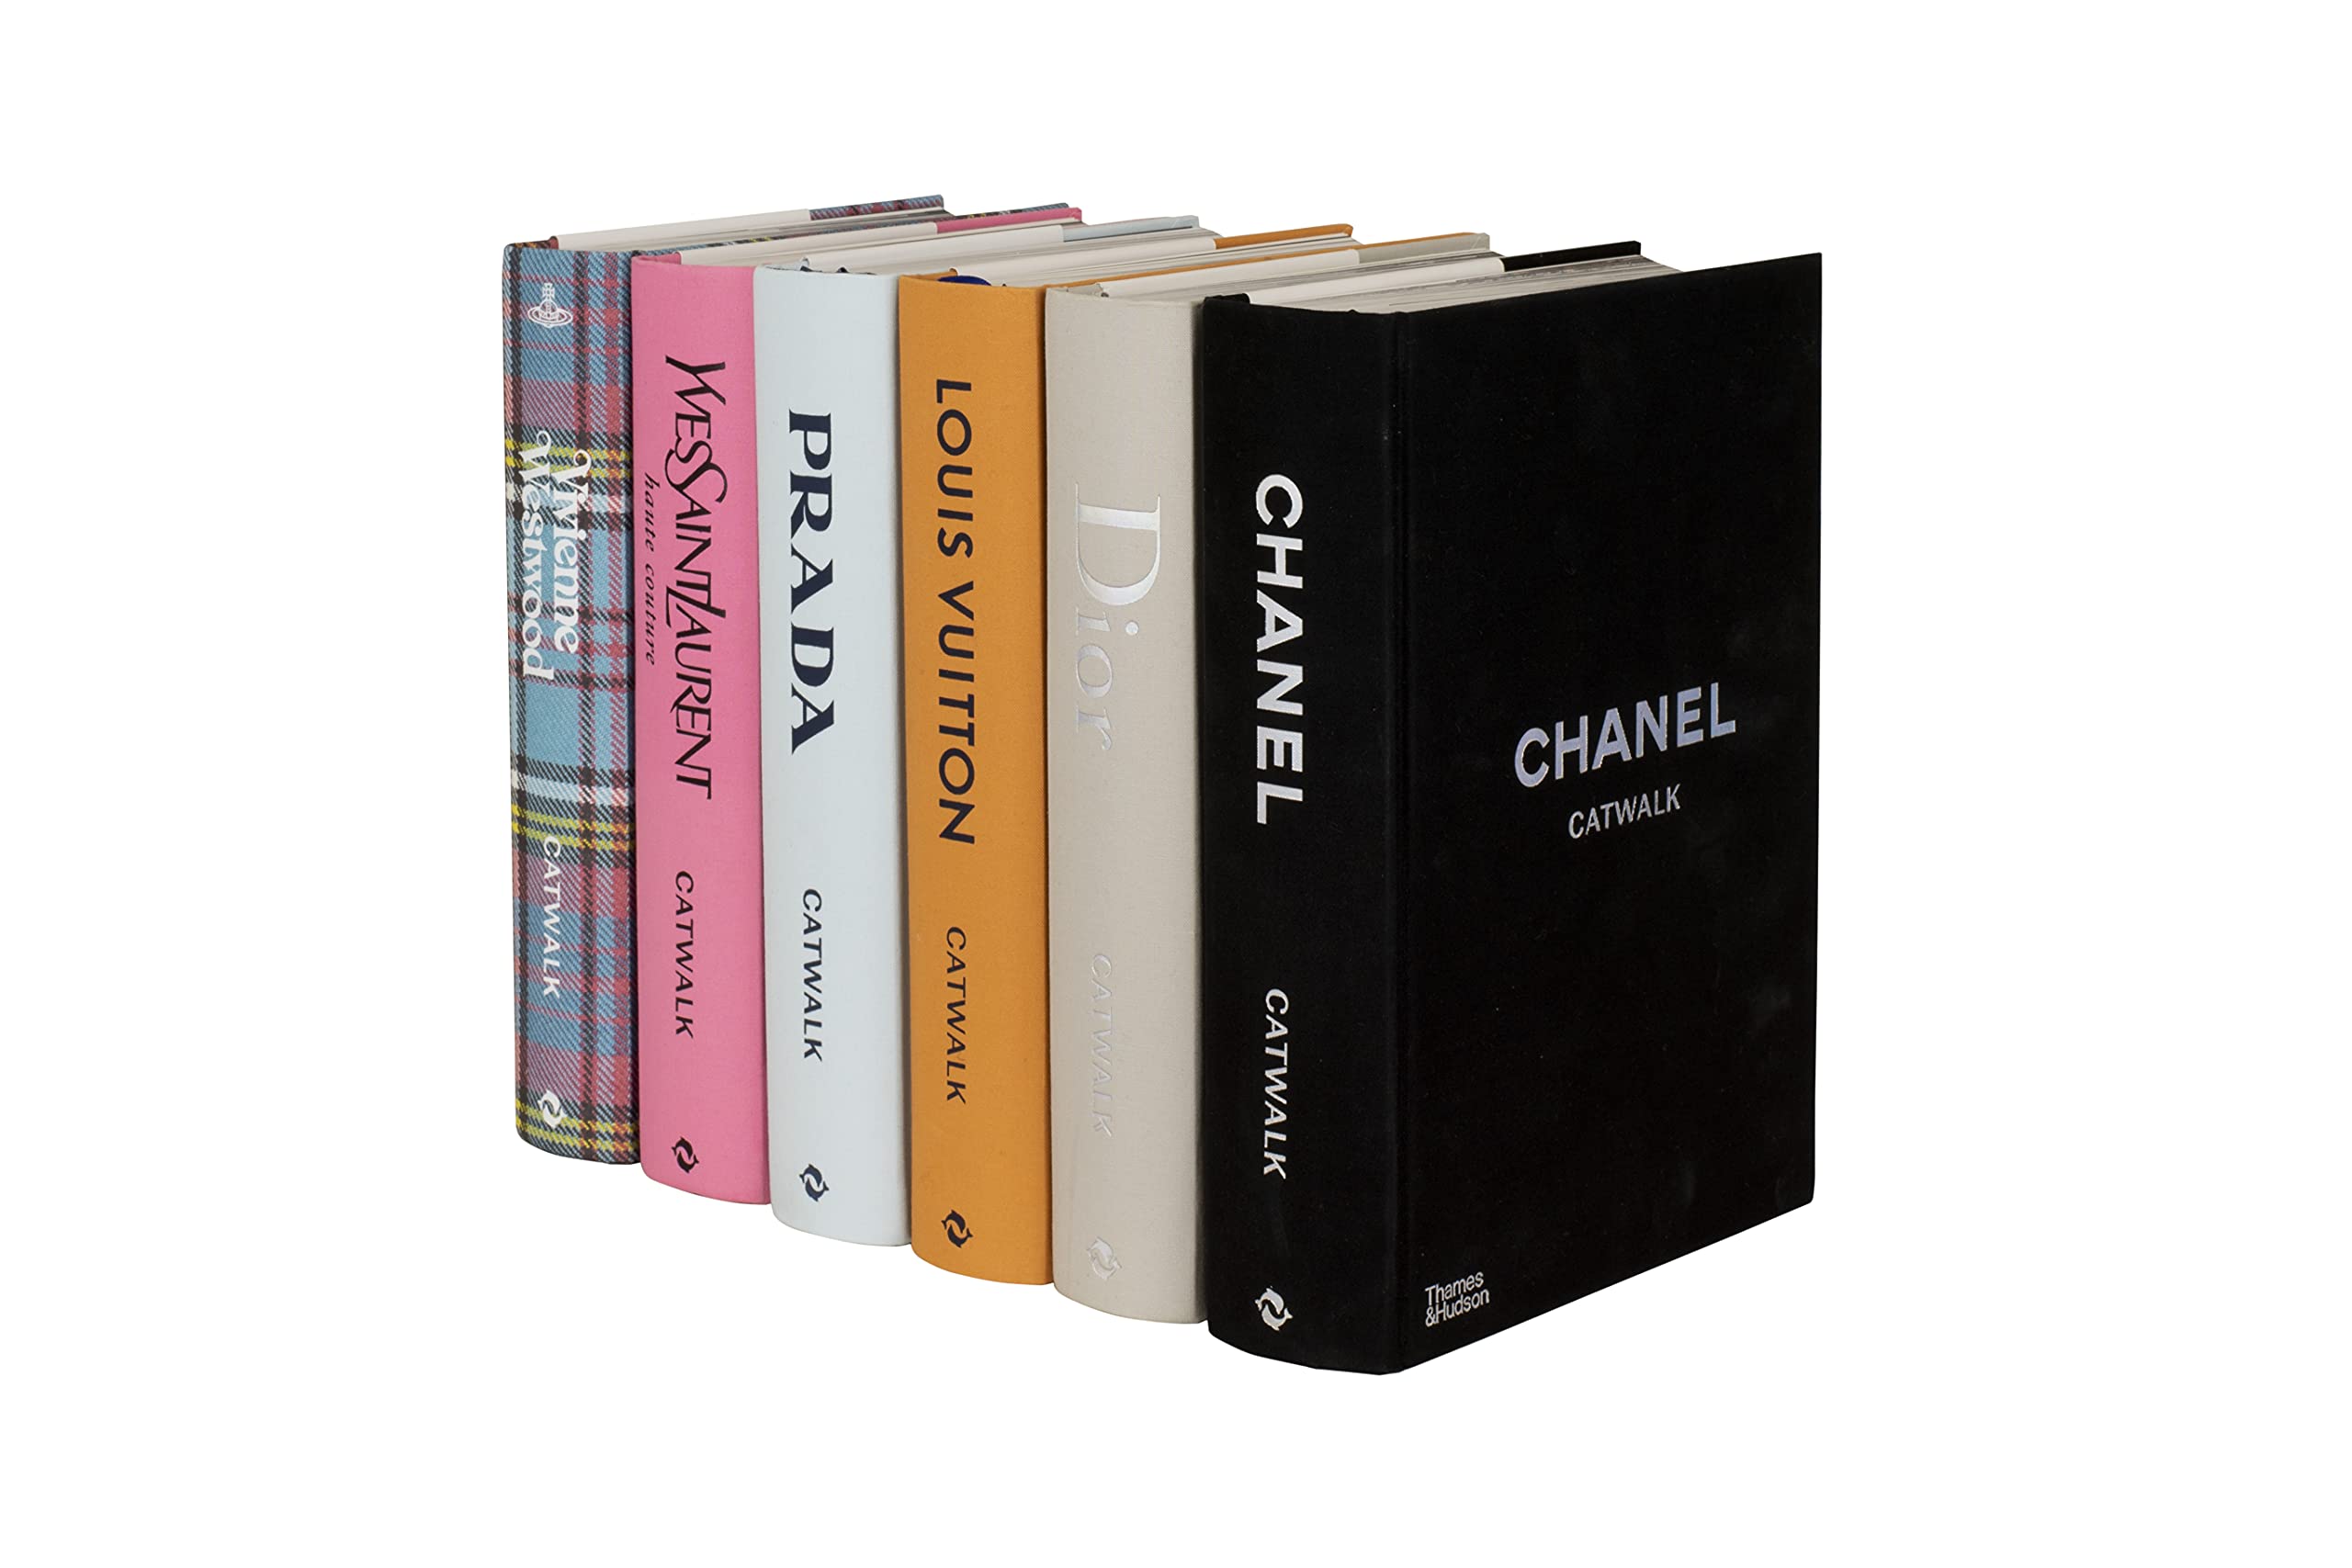 Louis Vuitton: The Complete Fashion Collections | KARMA Bookstore